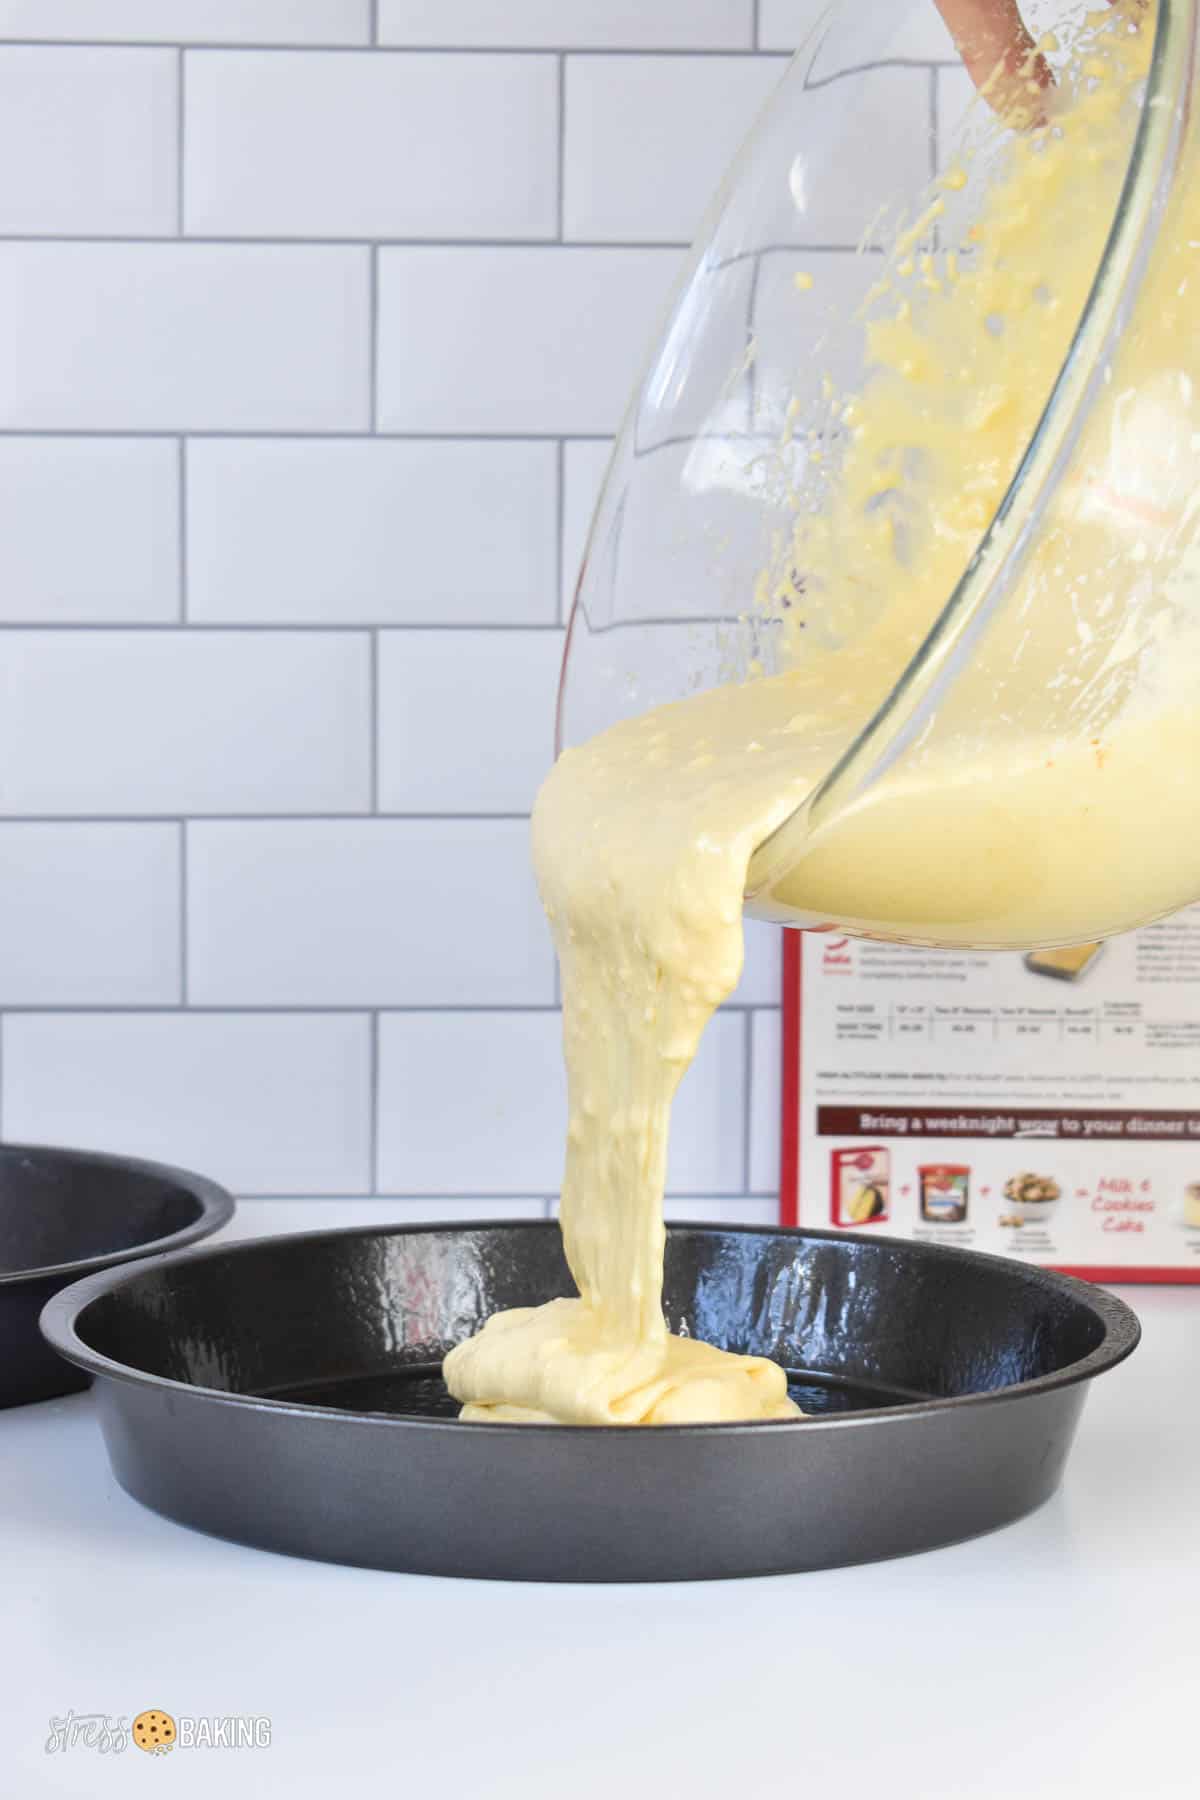 Vanilla cake batter being poured into a greased cake pan